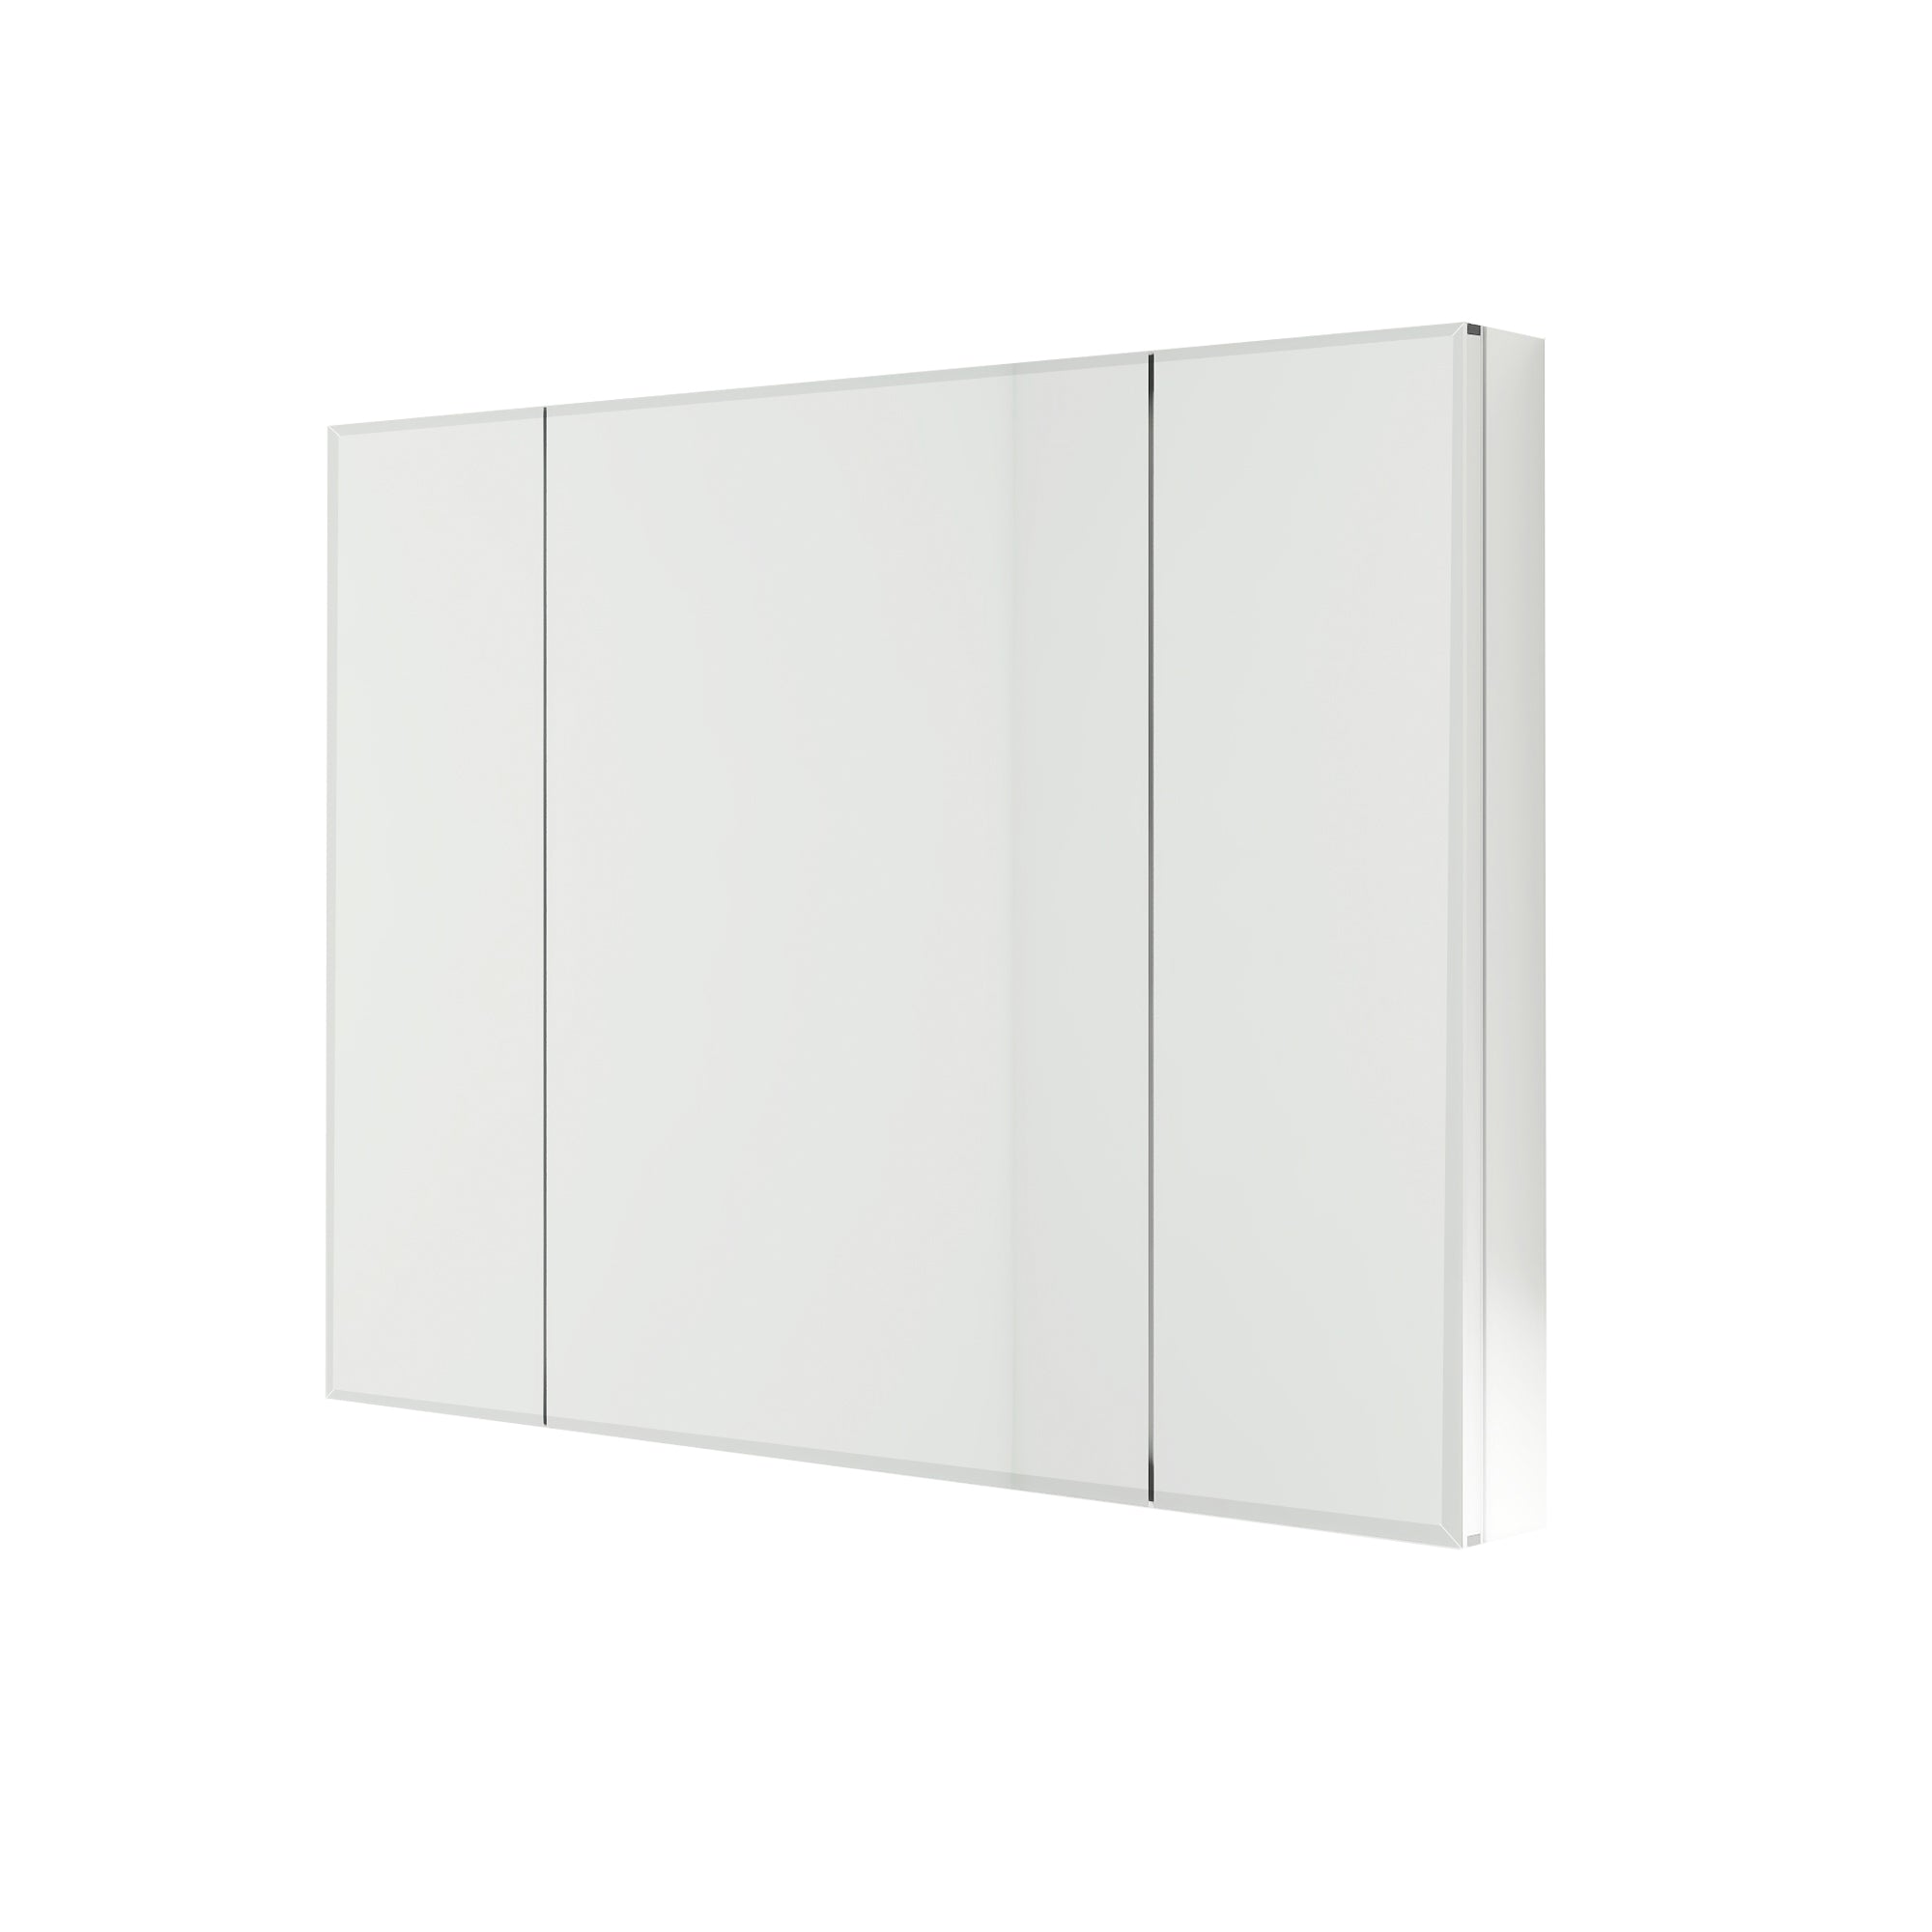 Staykiwi 36" Surface Mount Bathroom Medicine Cabinet with Mirror and Shelves